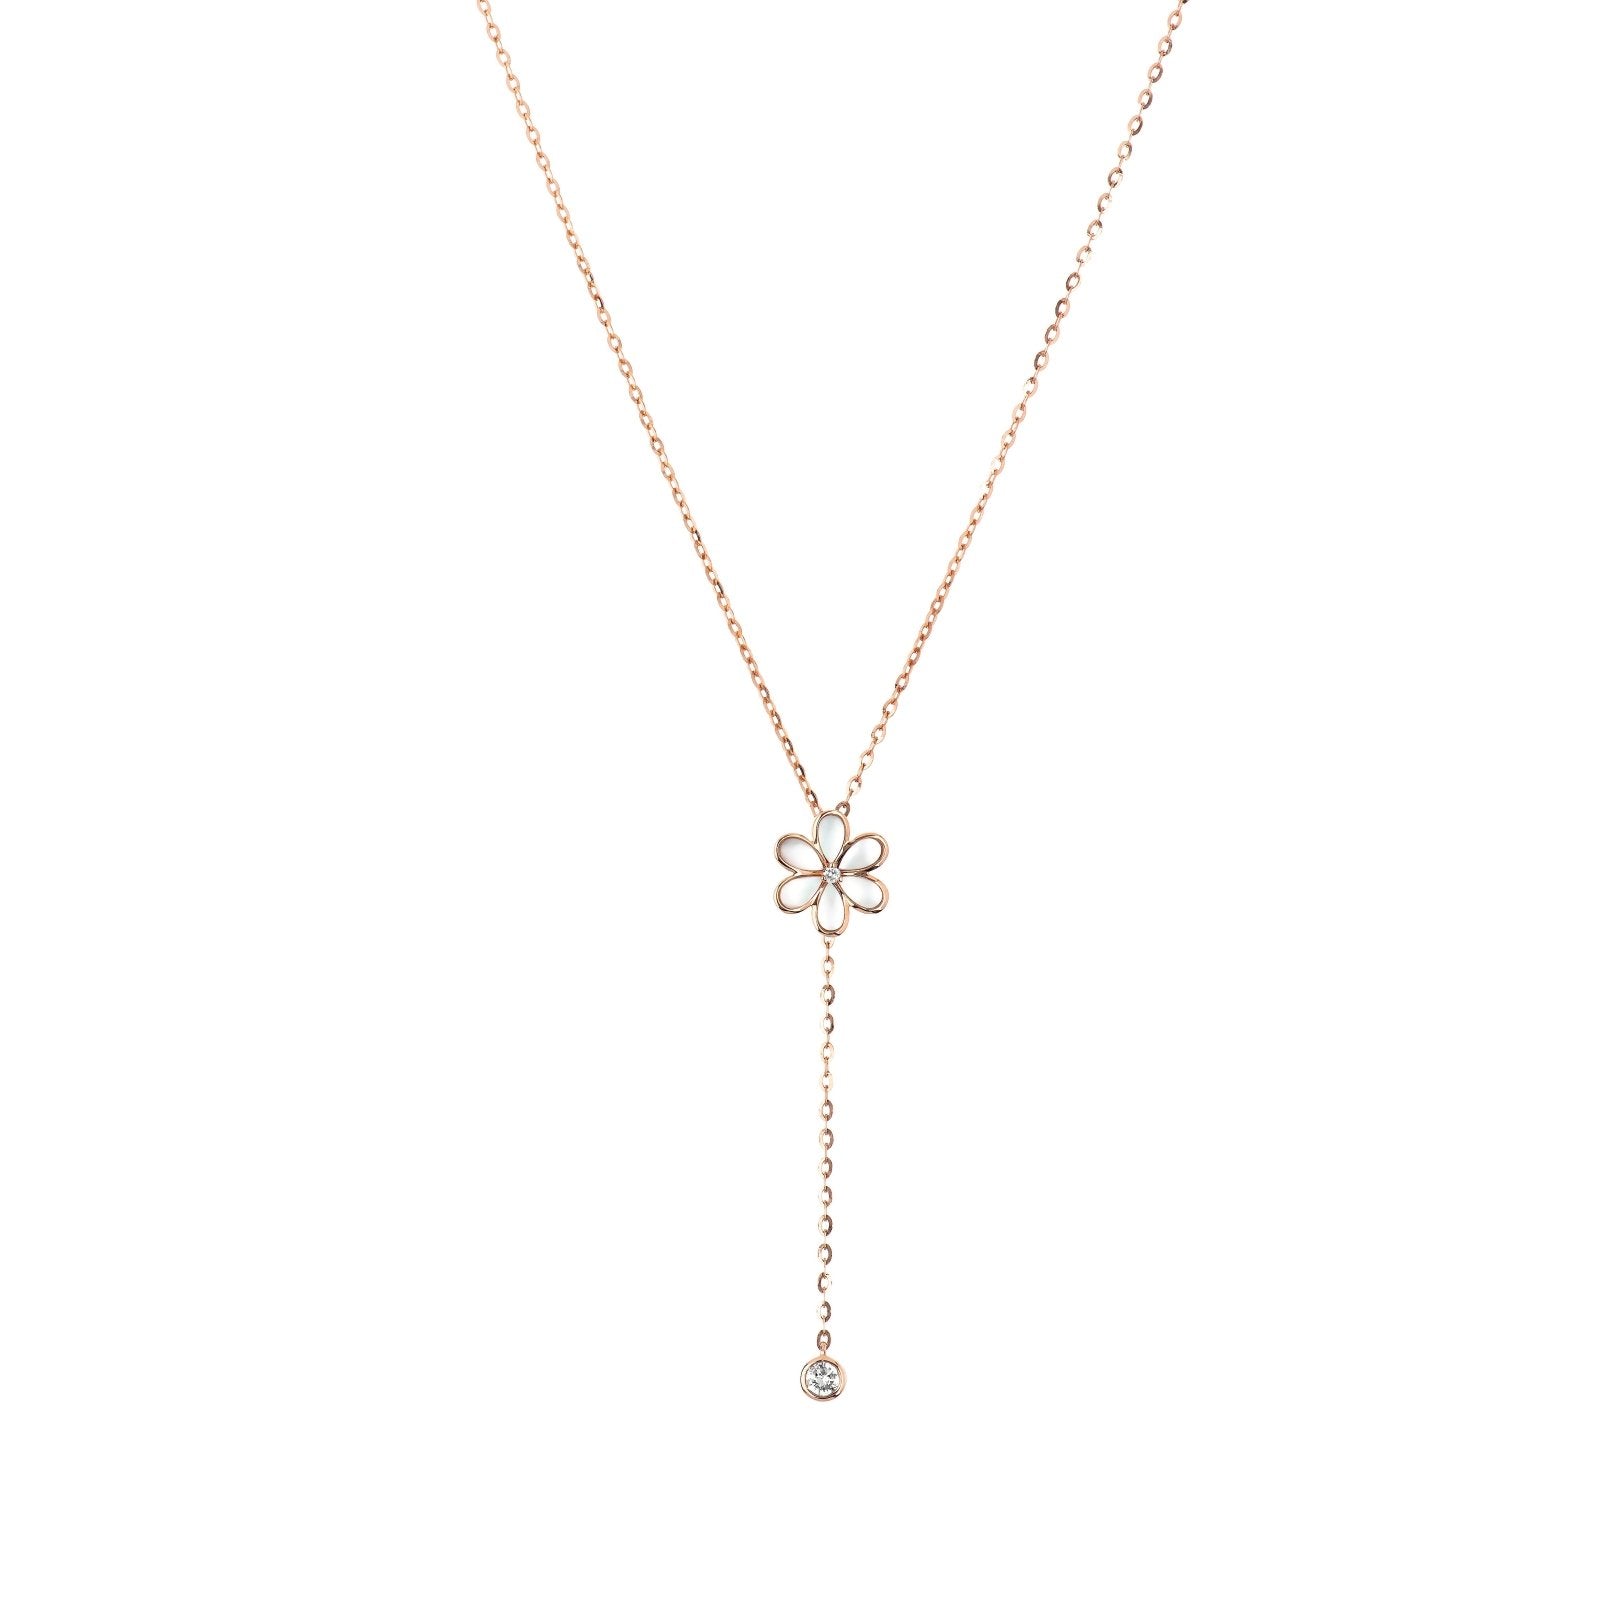 Mother of Pearl Flower and Diamond Drop Lariat Necklace Necklaces Estella Collection #product_description# 14k Birthstone Diamond #tag4# #tag5# #tag6# #tag7# #tag8# #tag9# #tag10#